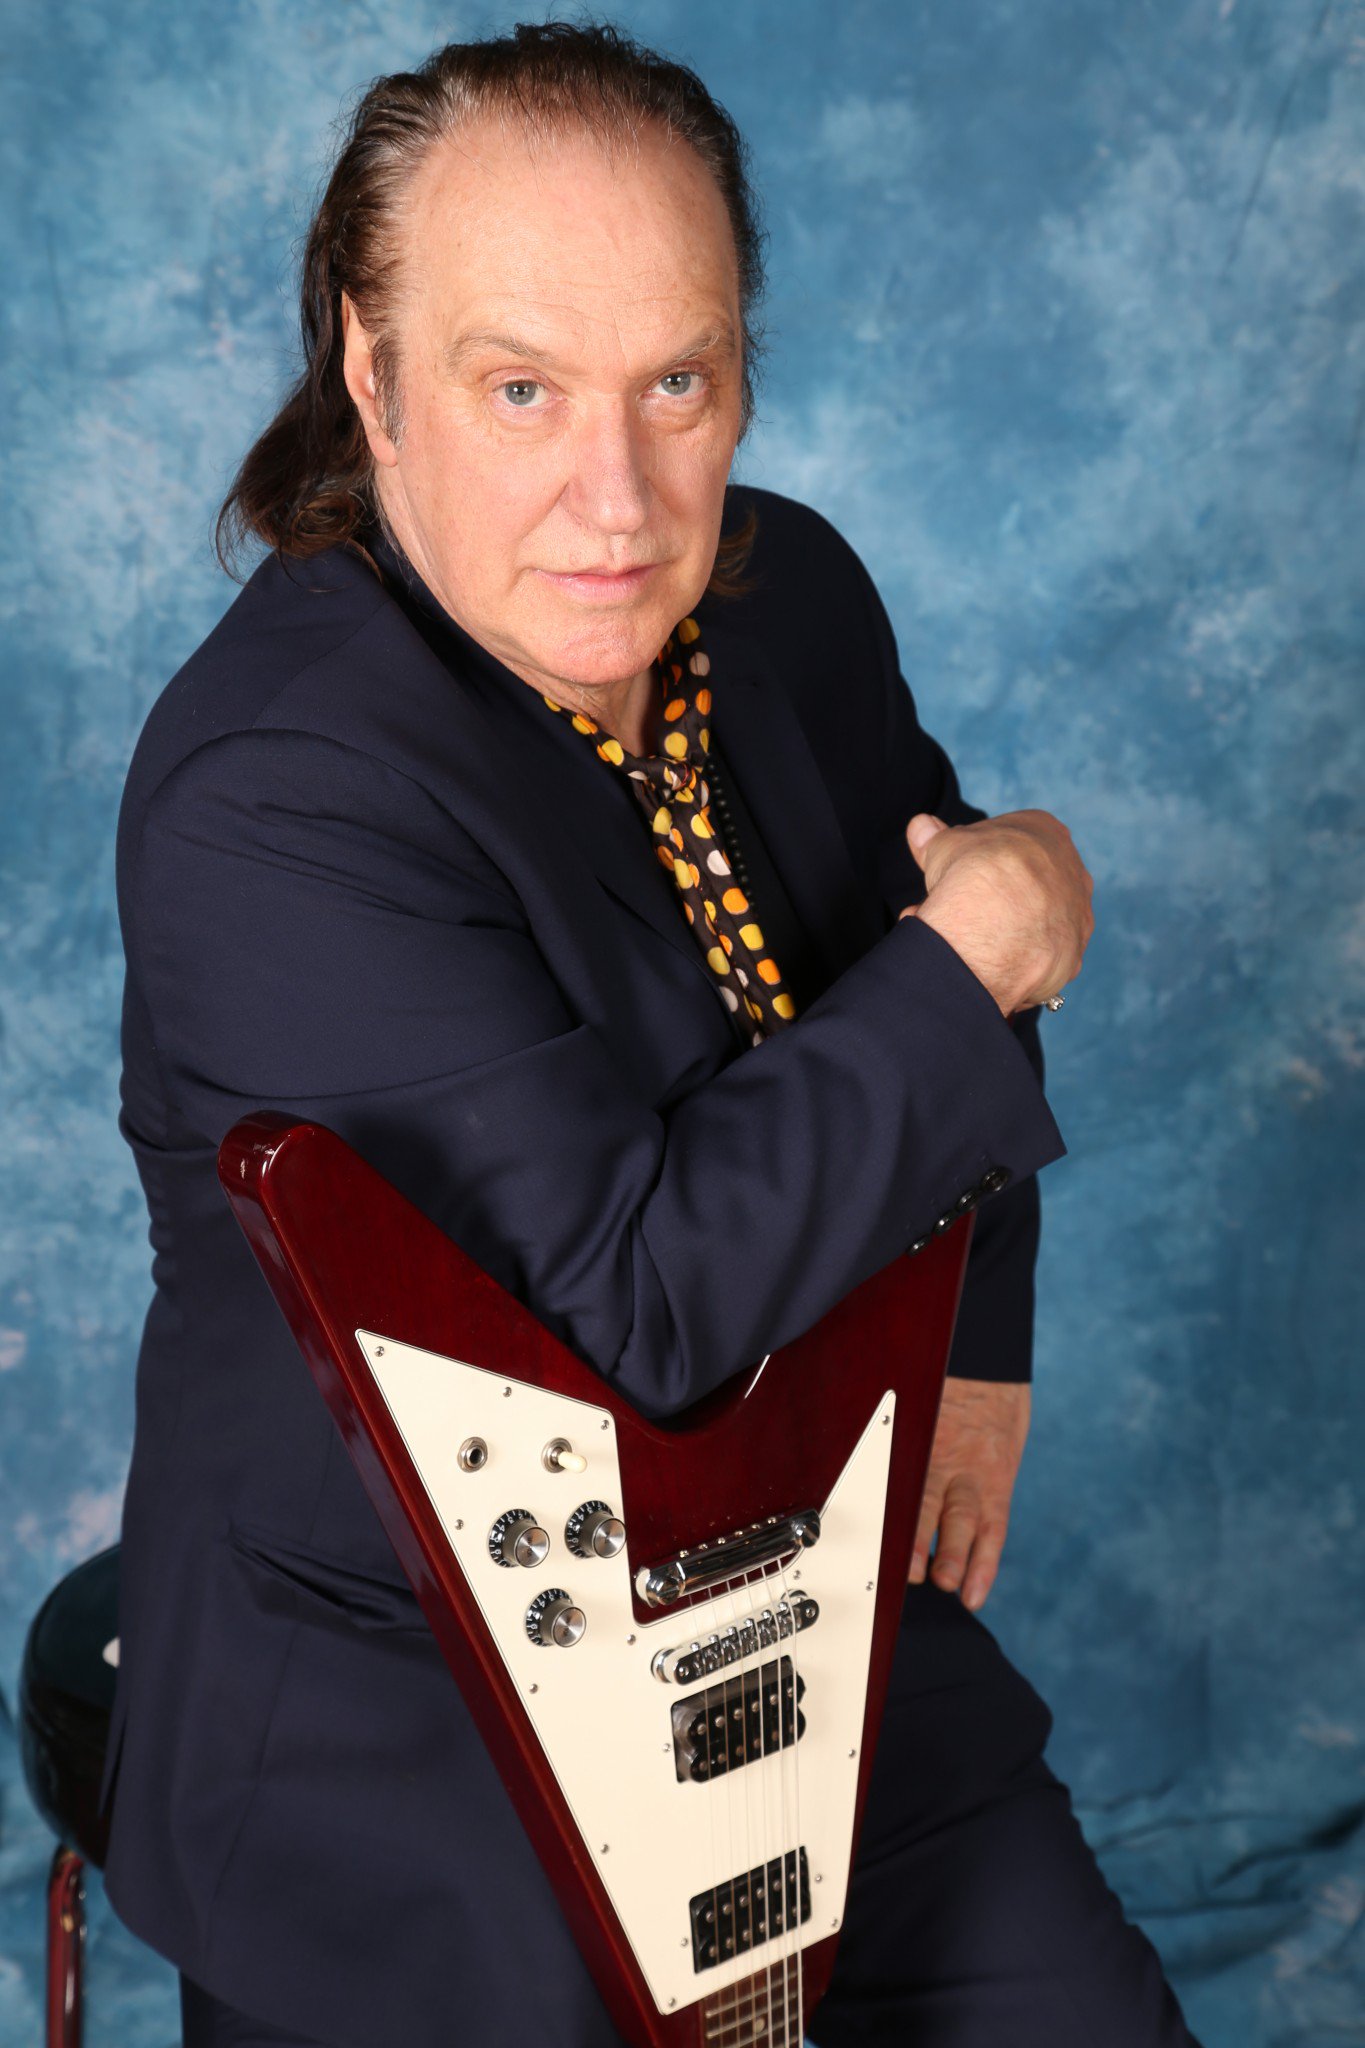  You Really Got Me  Happy Birthday Today 2/3 to legendary Kinks guitarist Dave Davies.  Rock ON! 